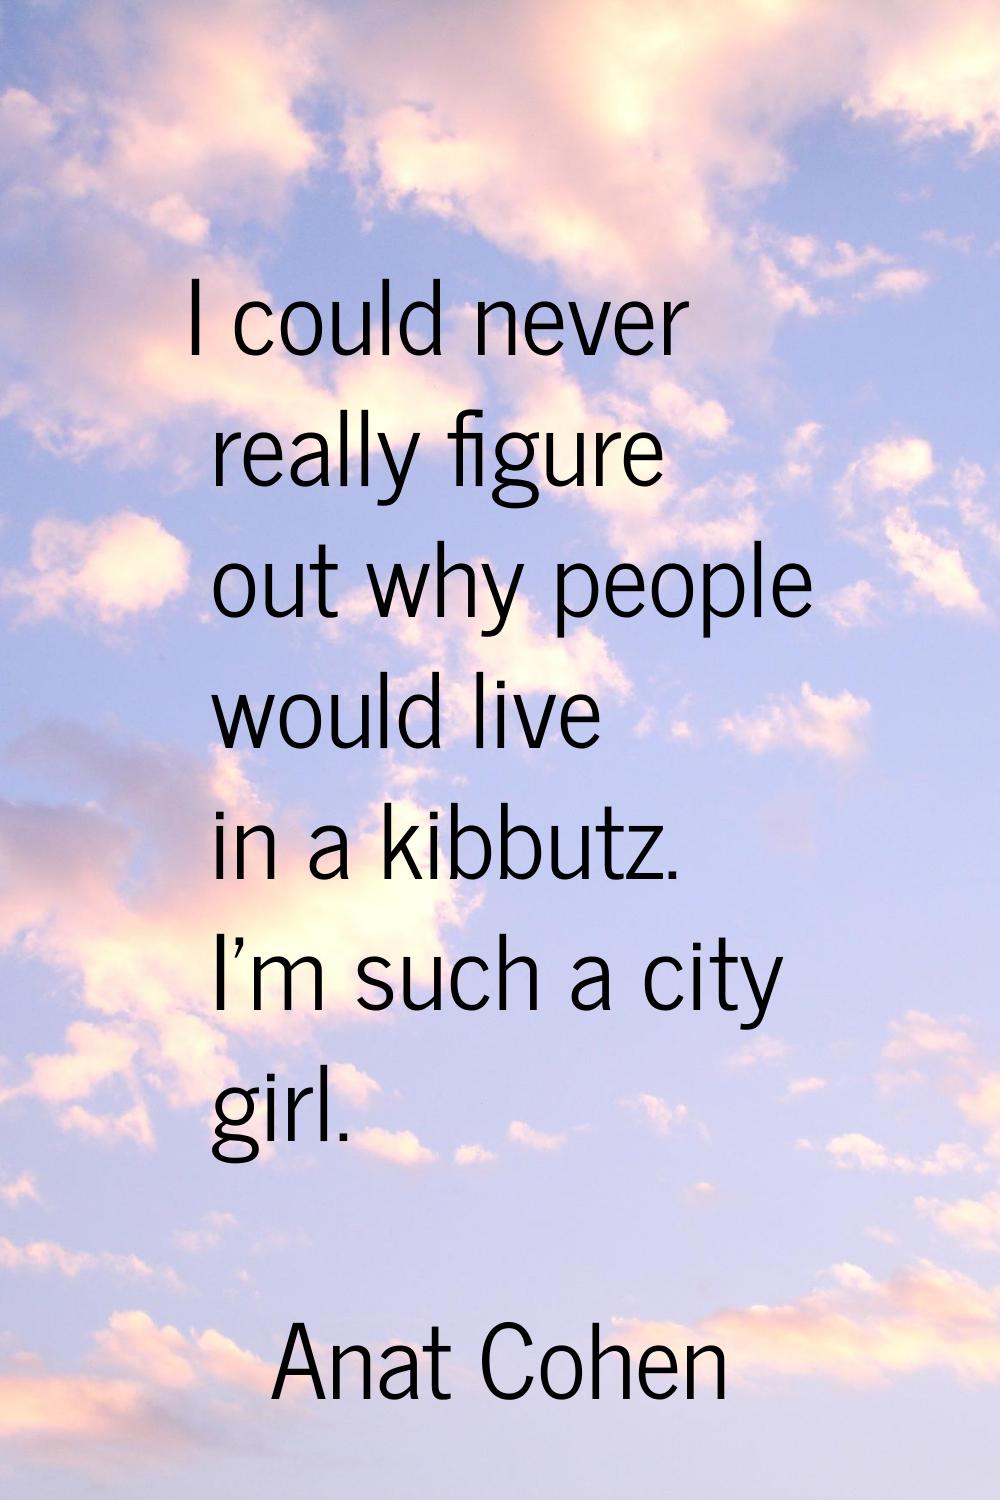 I could never really figure out why people would live in a kibbutz. I'm such a city girl.